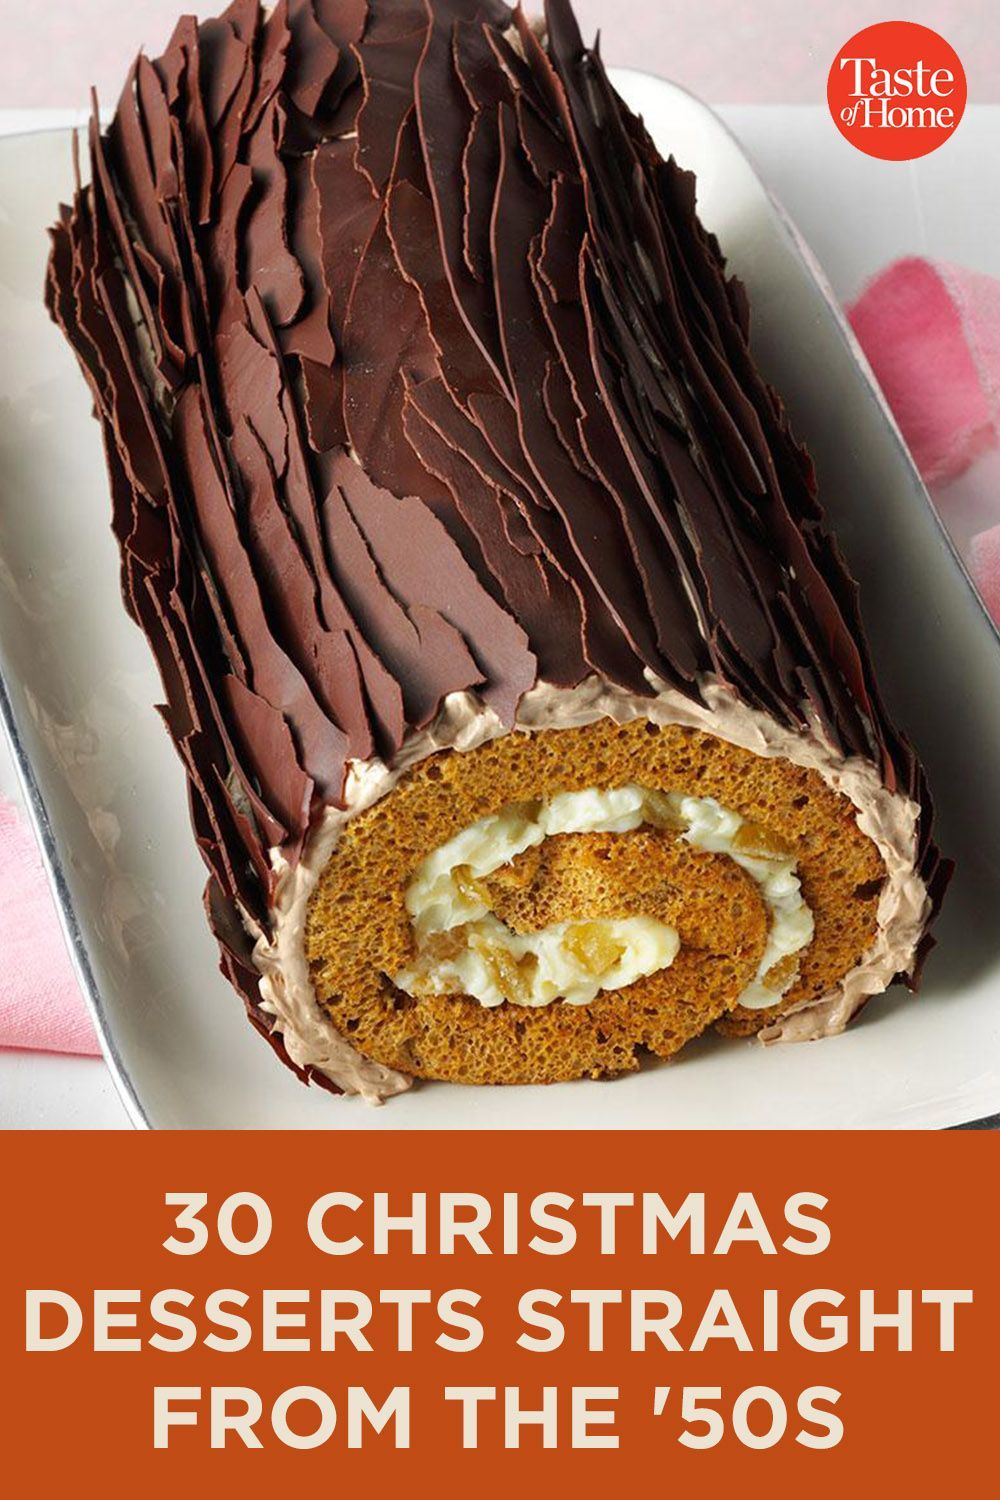 30 Christmas Desserts Straight from the '50s -   18 desserts Christmas cake ideas